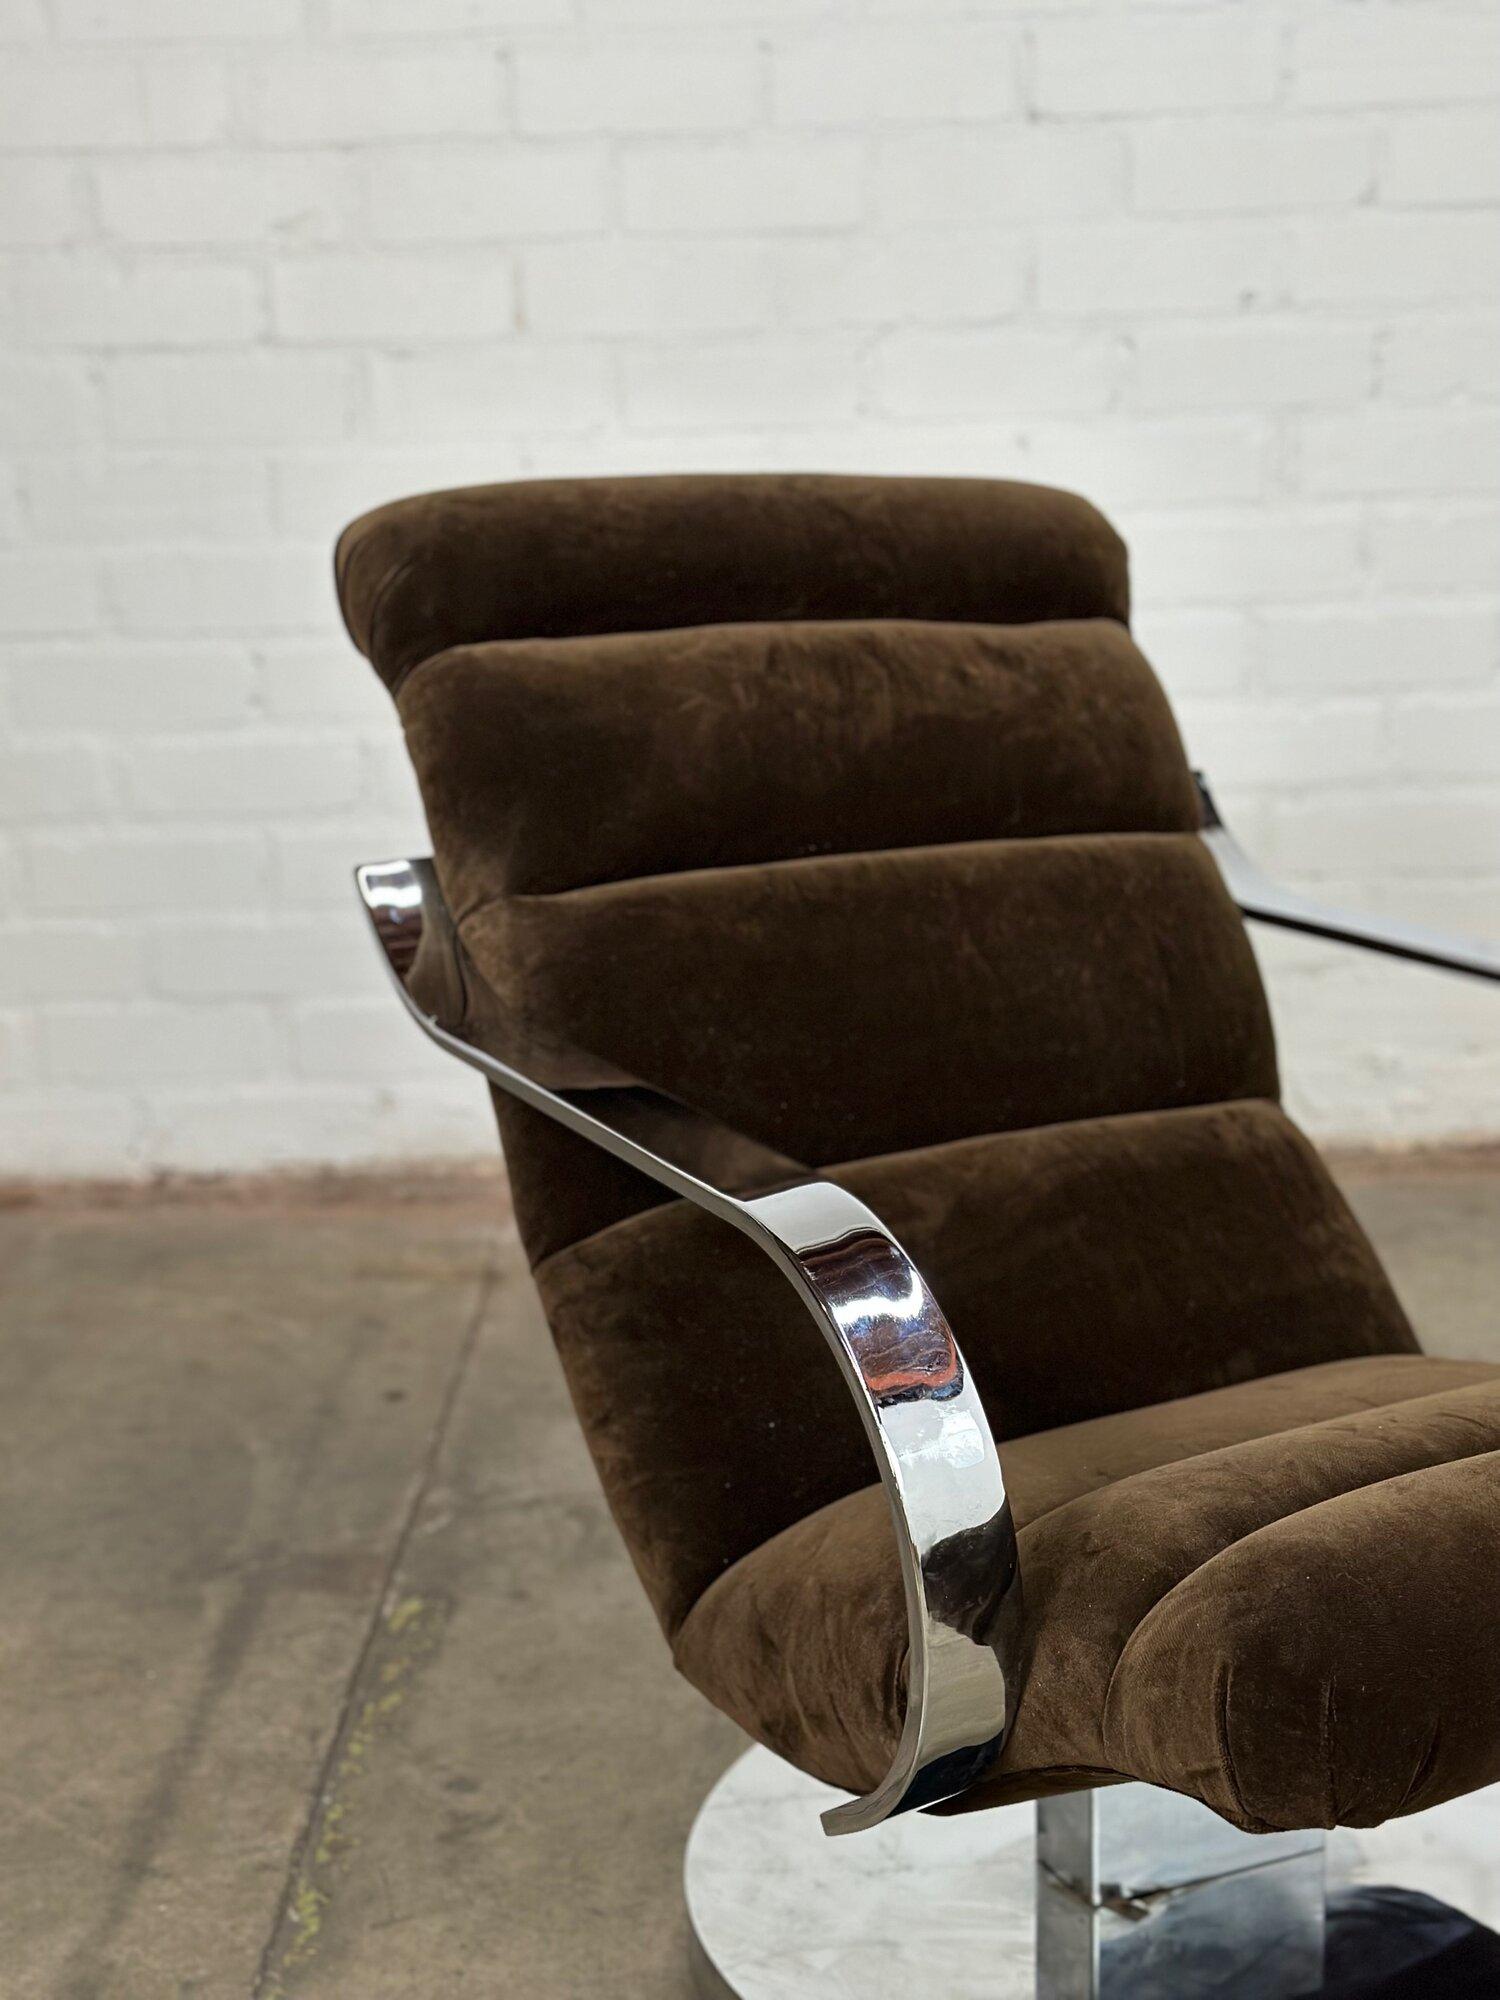 Measures: W26 D38 H31 SW21 SD19 SH16 AH21

Vintage chrome and chocolate velvet lounger reminiscent of the waive chaise by Milo Baughman. Chair swivels and slightly reclines and features a chrome base and frame with minimal patina. Item is